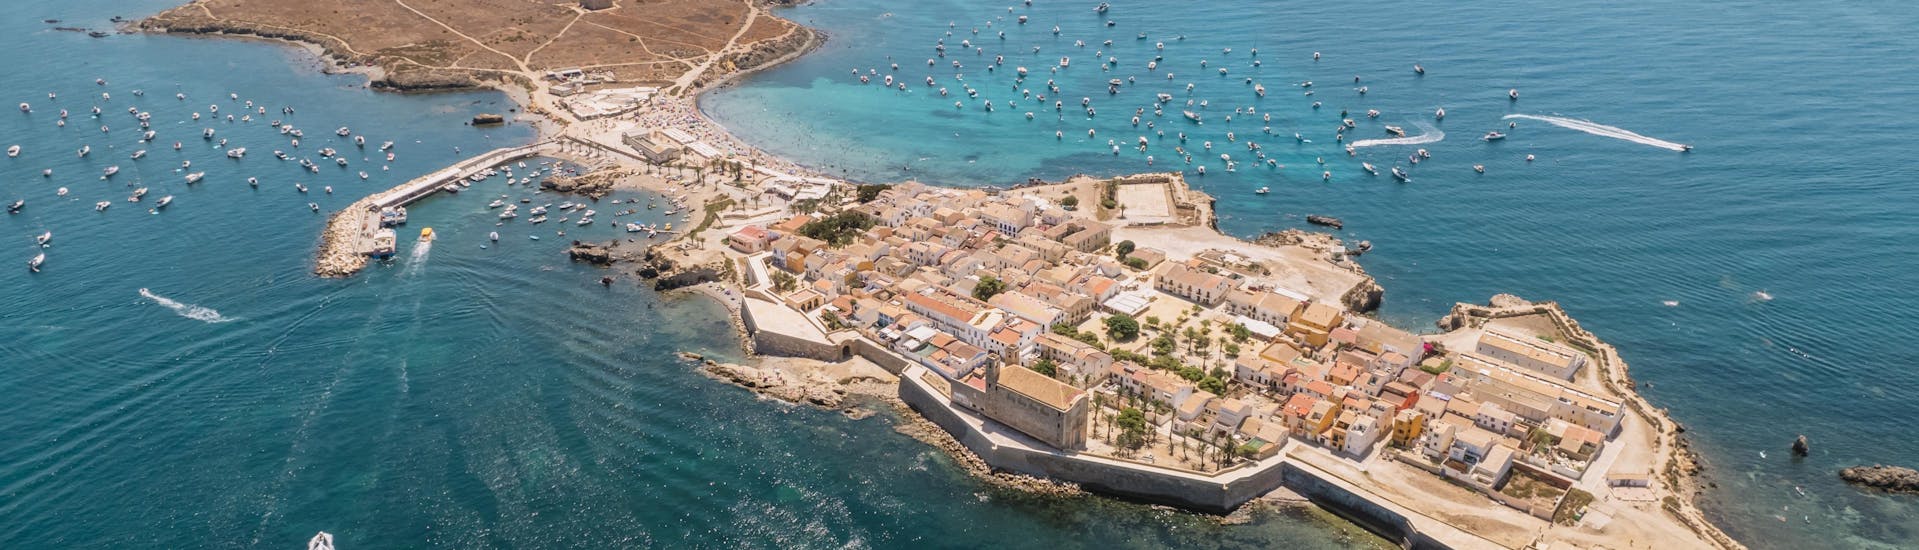 Aerial view of boats reaching the island of Tabarca in Alicante.